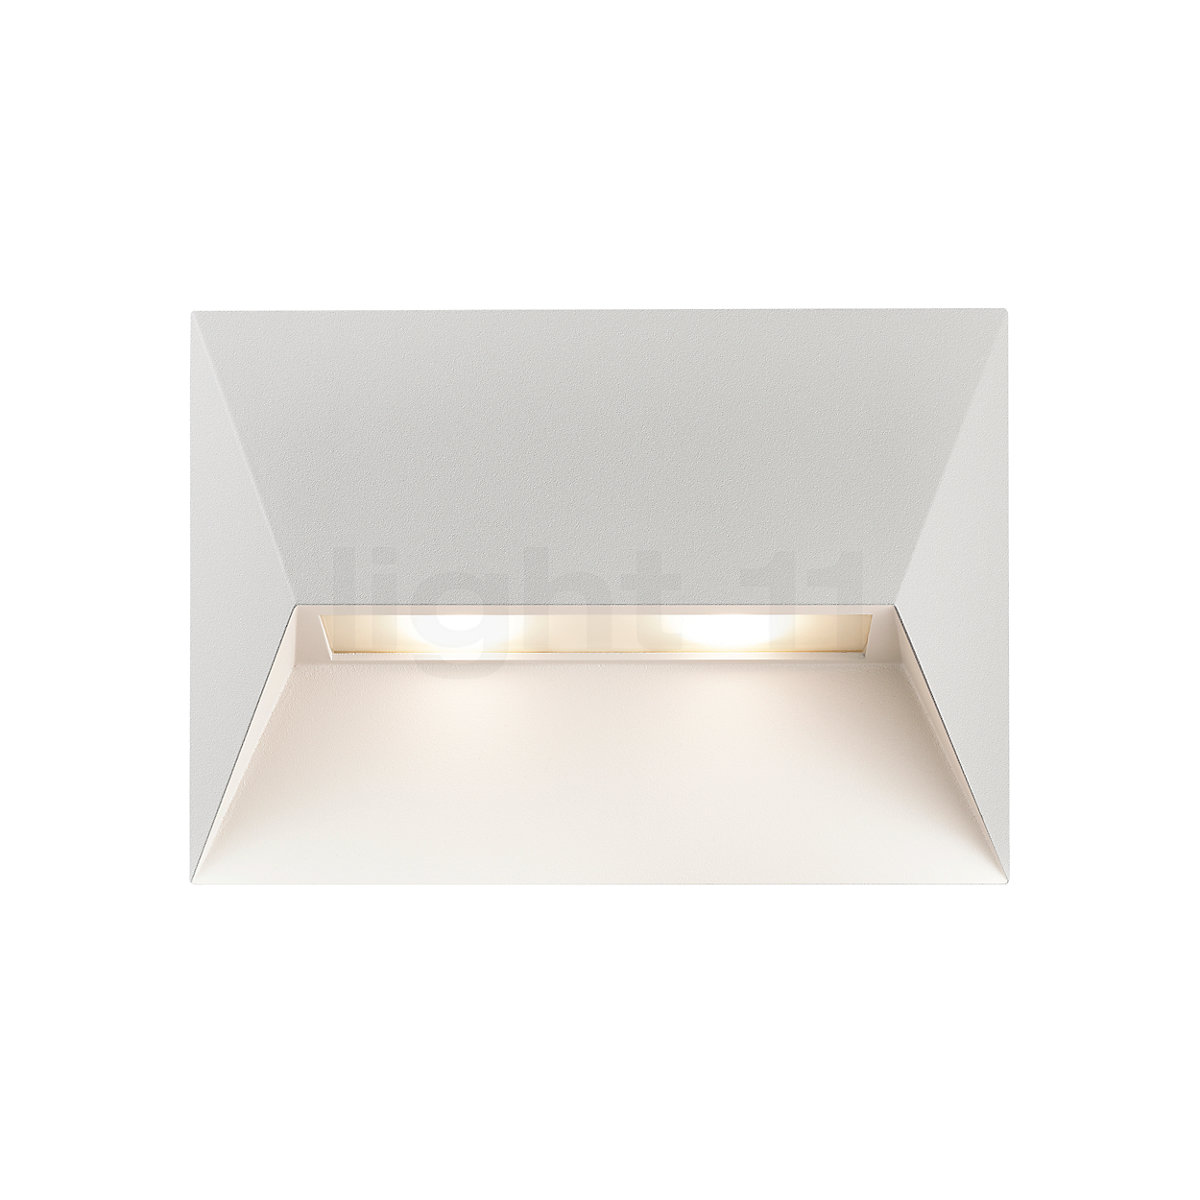 Buy Nordlux Pontio Light at Wall